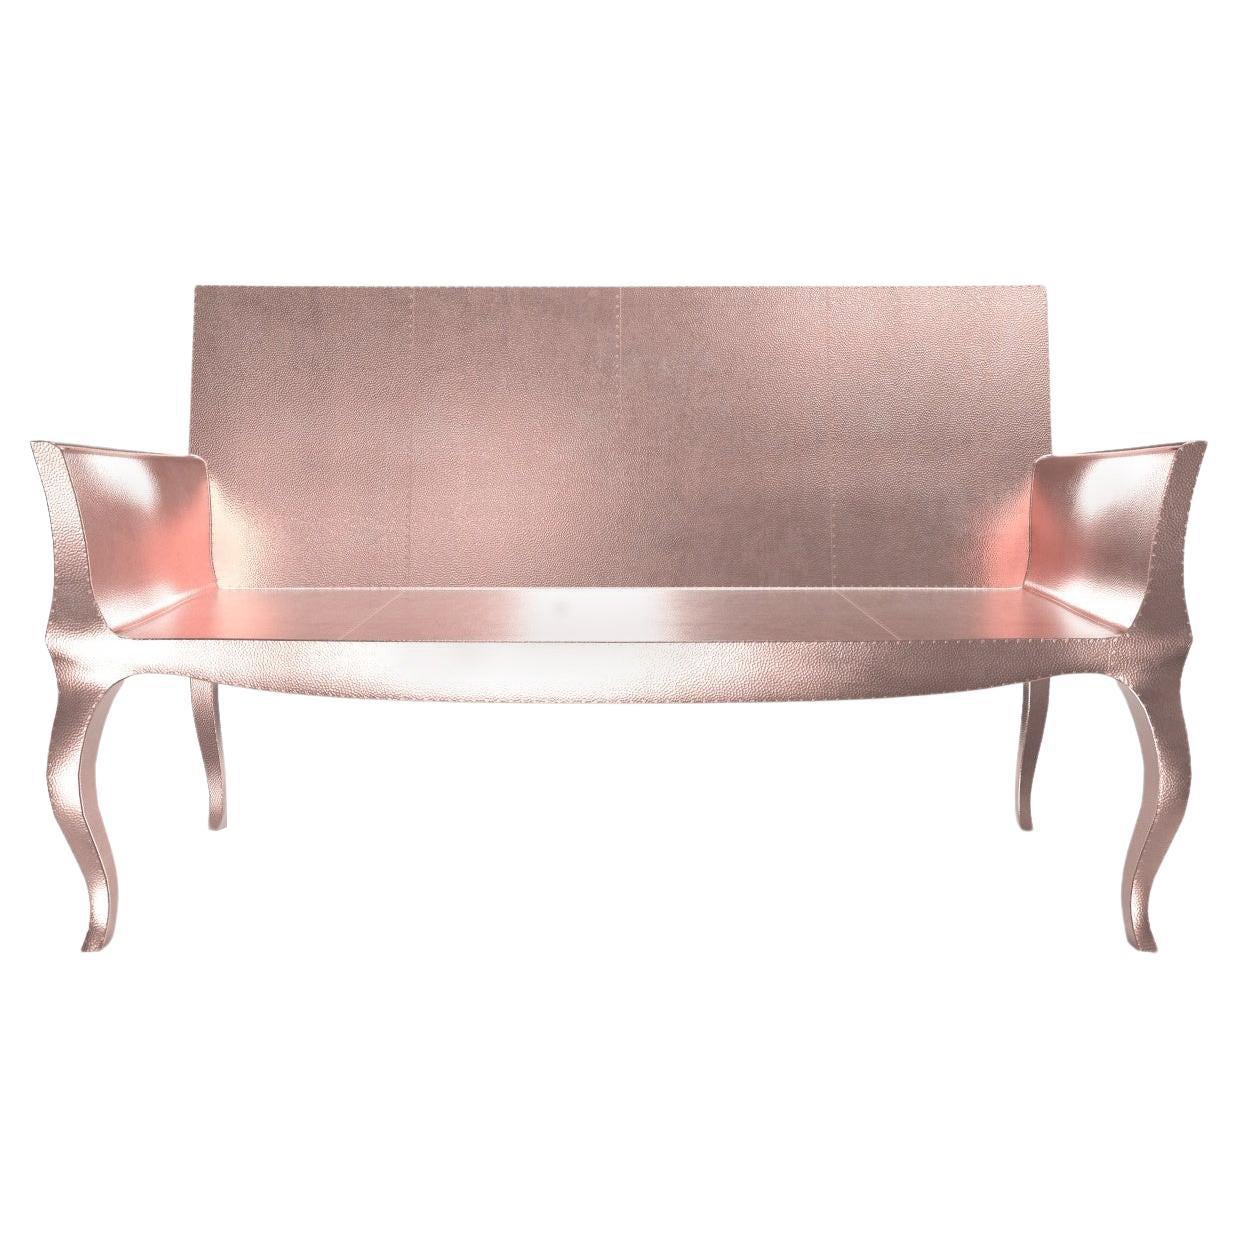 Louise Settee Art Deco Living Room Sets in Mid. Hammered Copper by Paul Mathieu For Sale